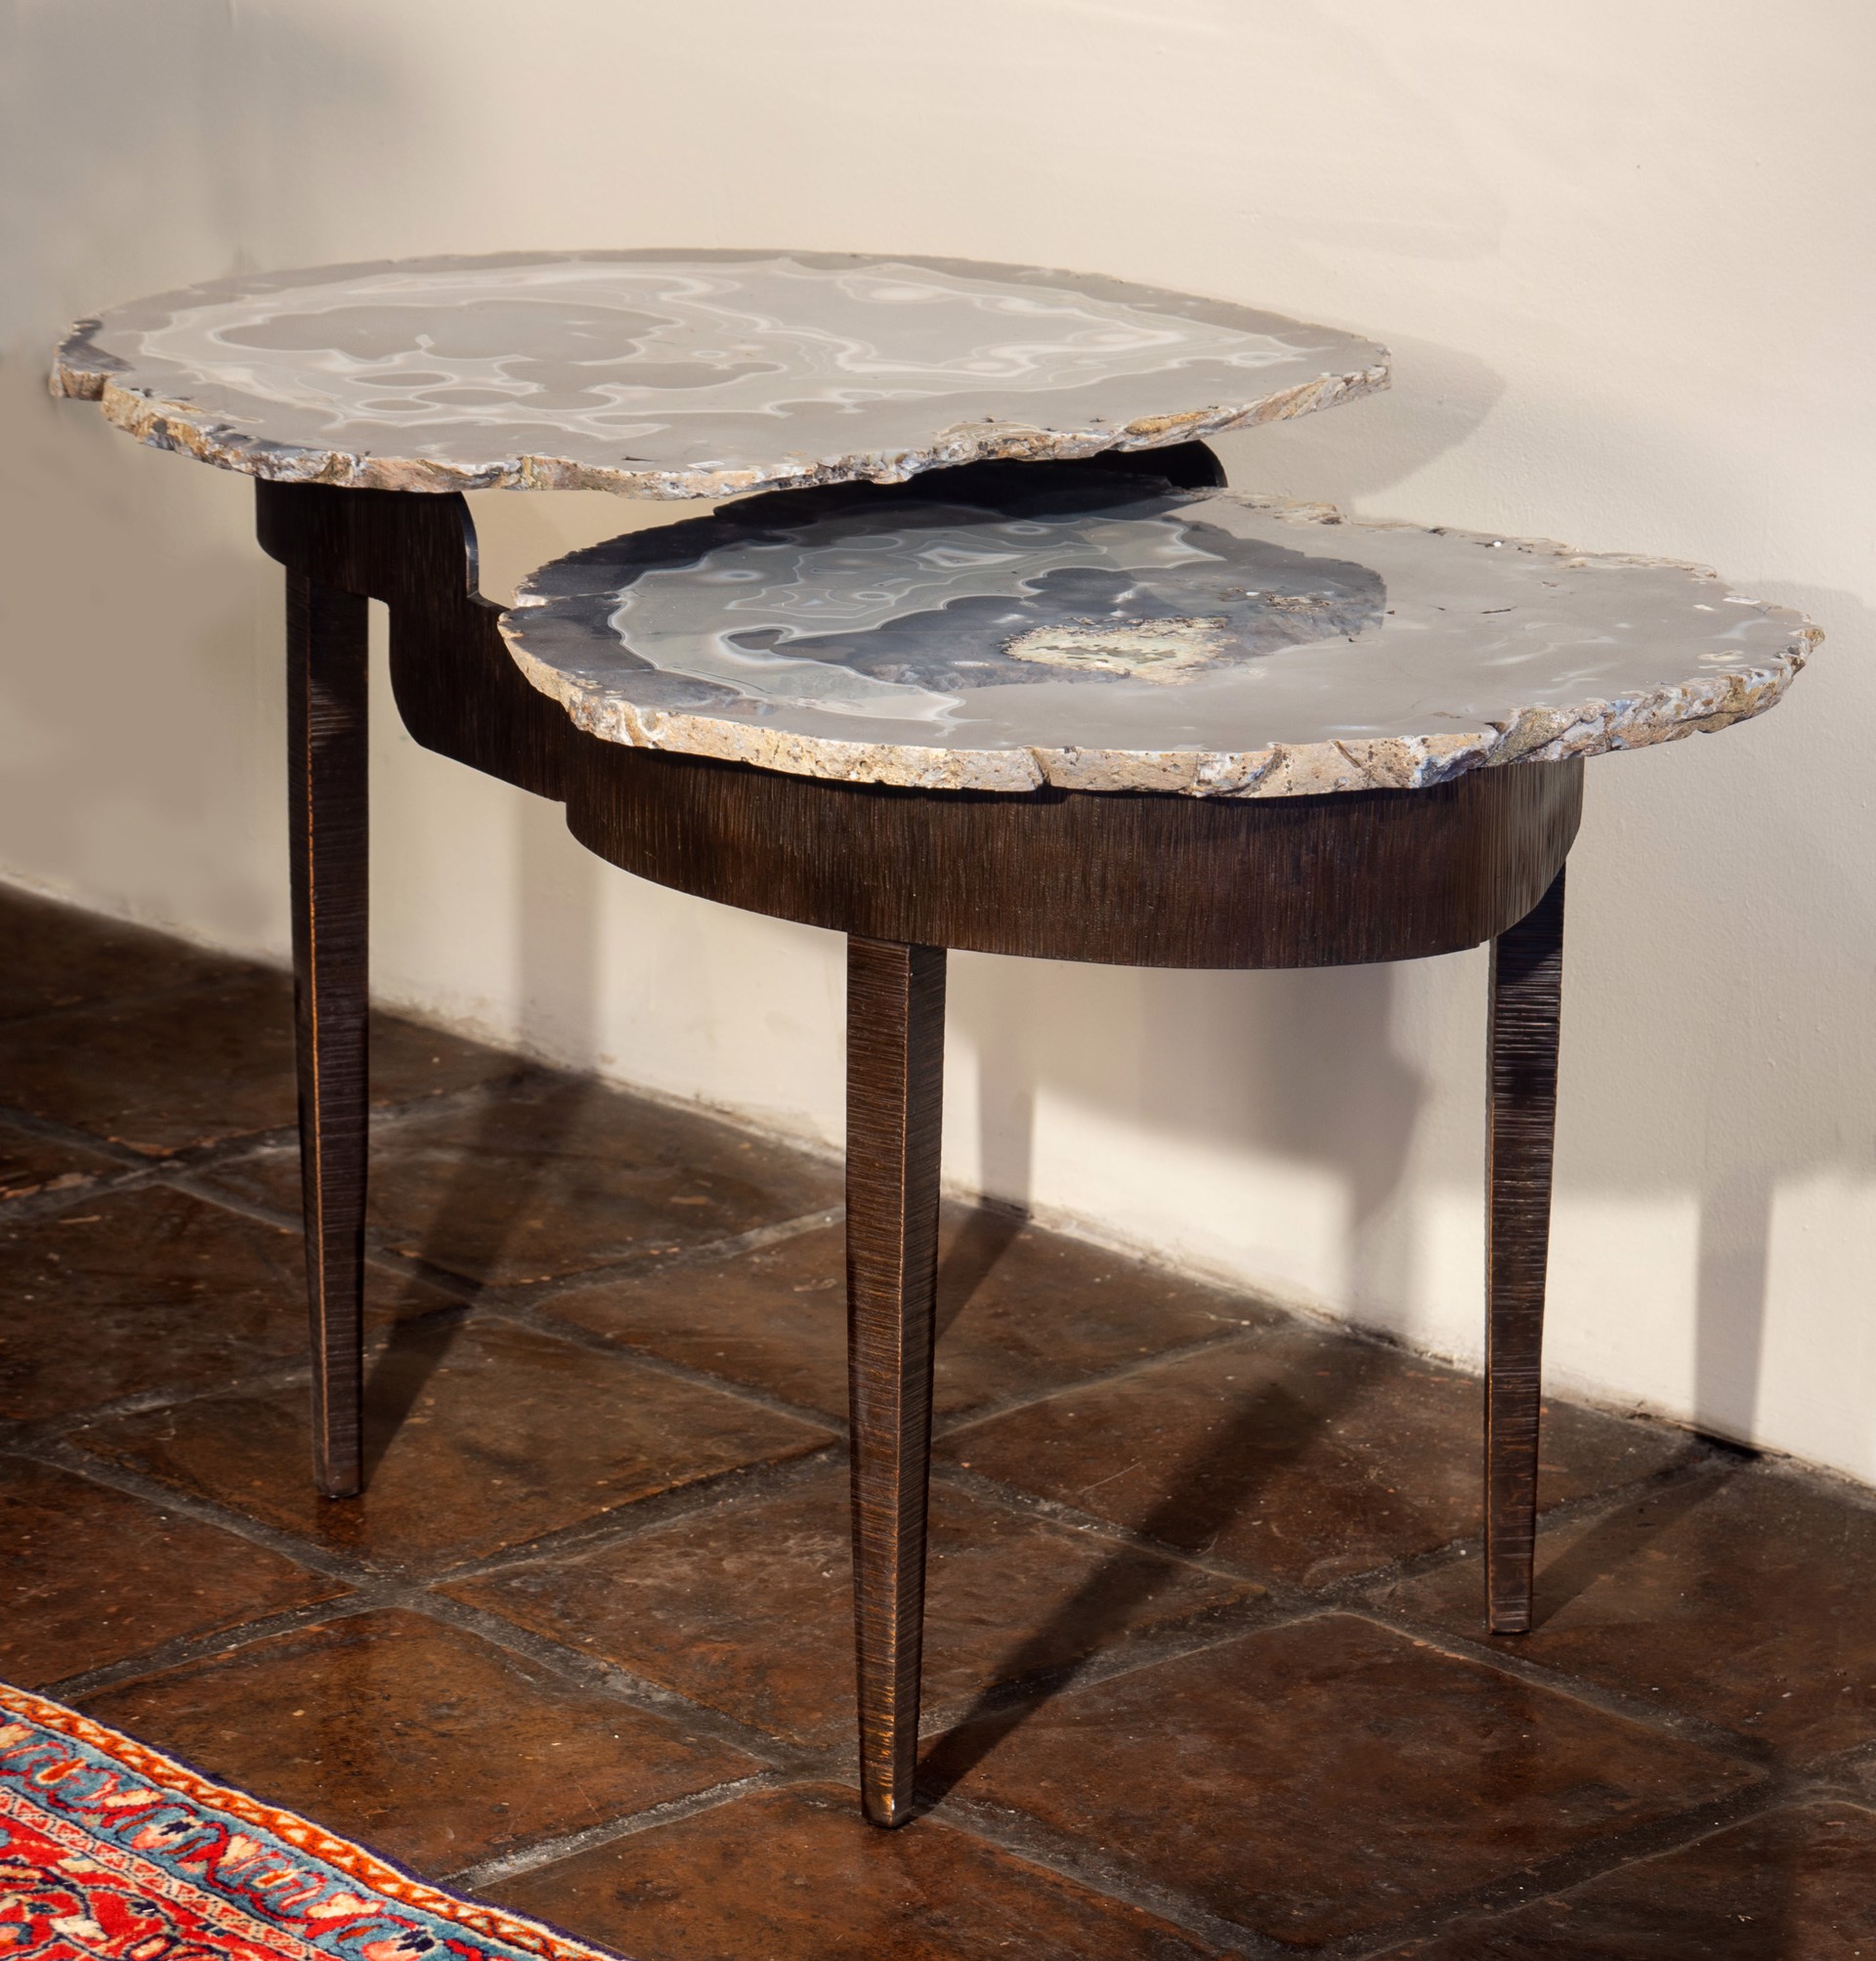 Double Floating Table by Jim Vilona